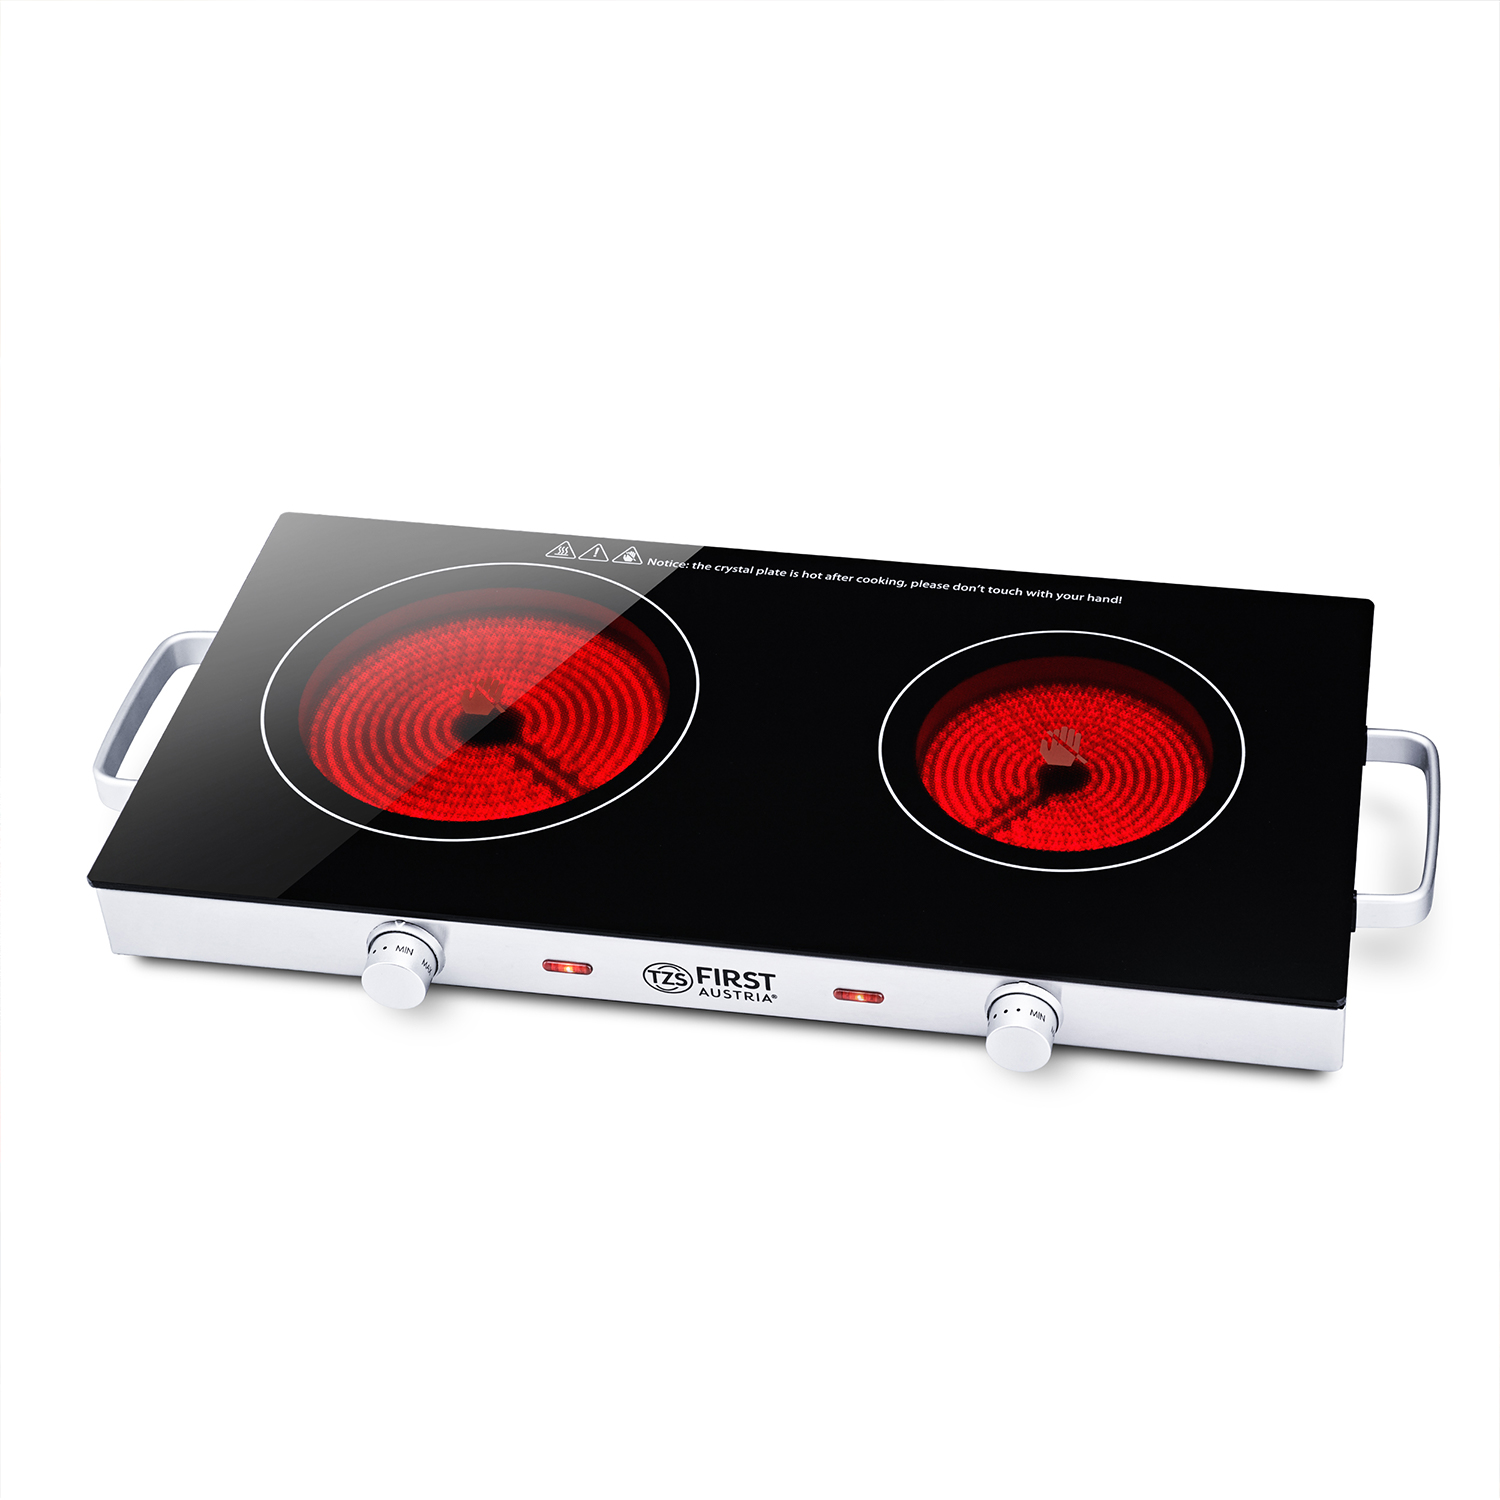 Infrared hotplate | single or double